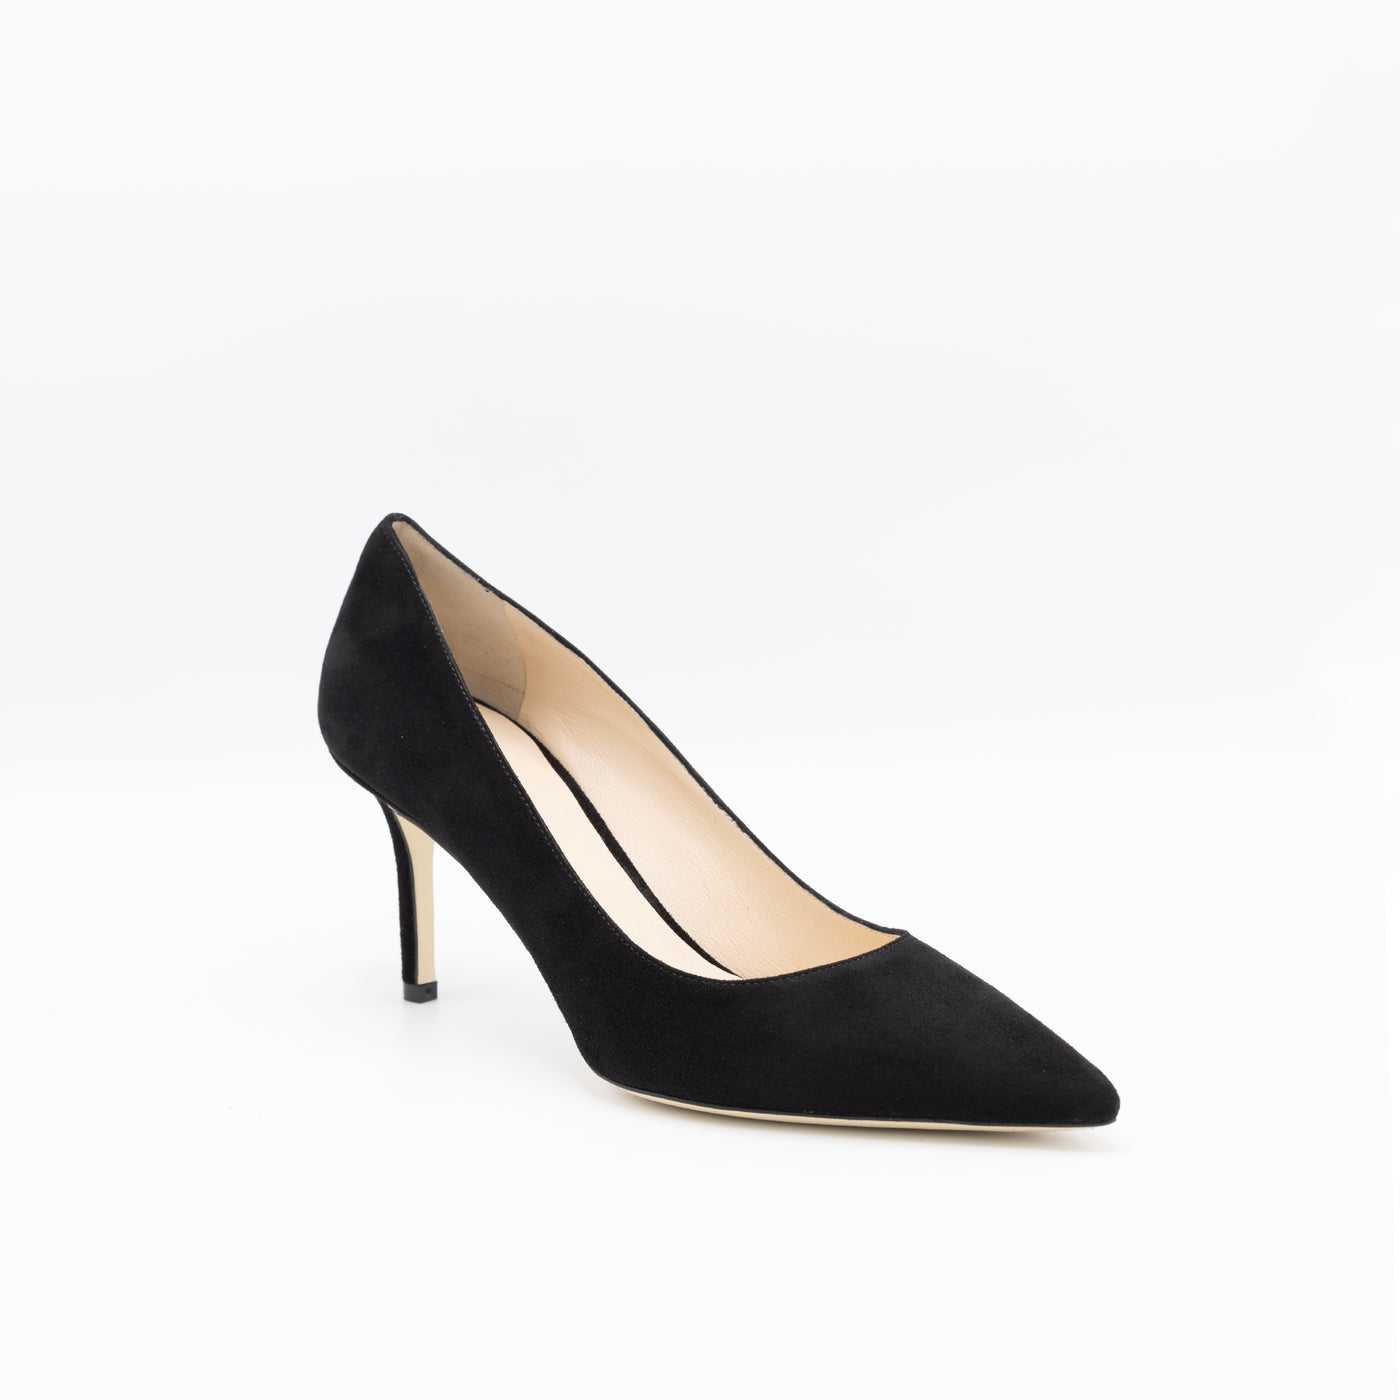 Point toe black suede leather pumps